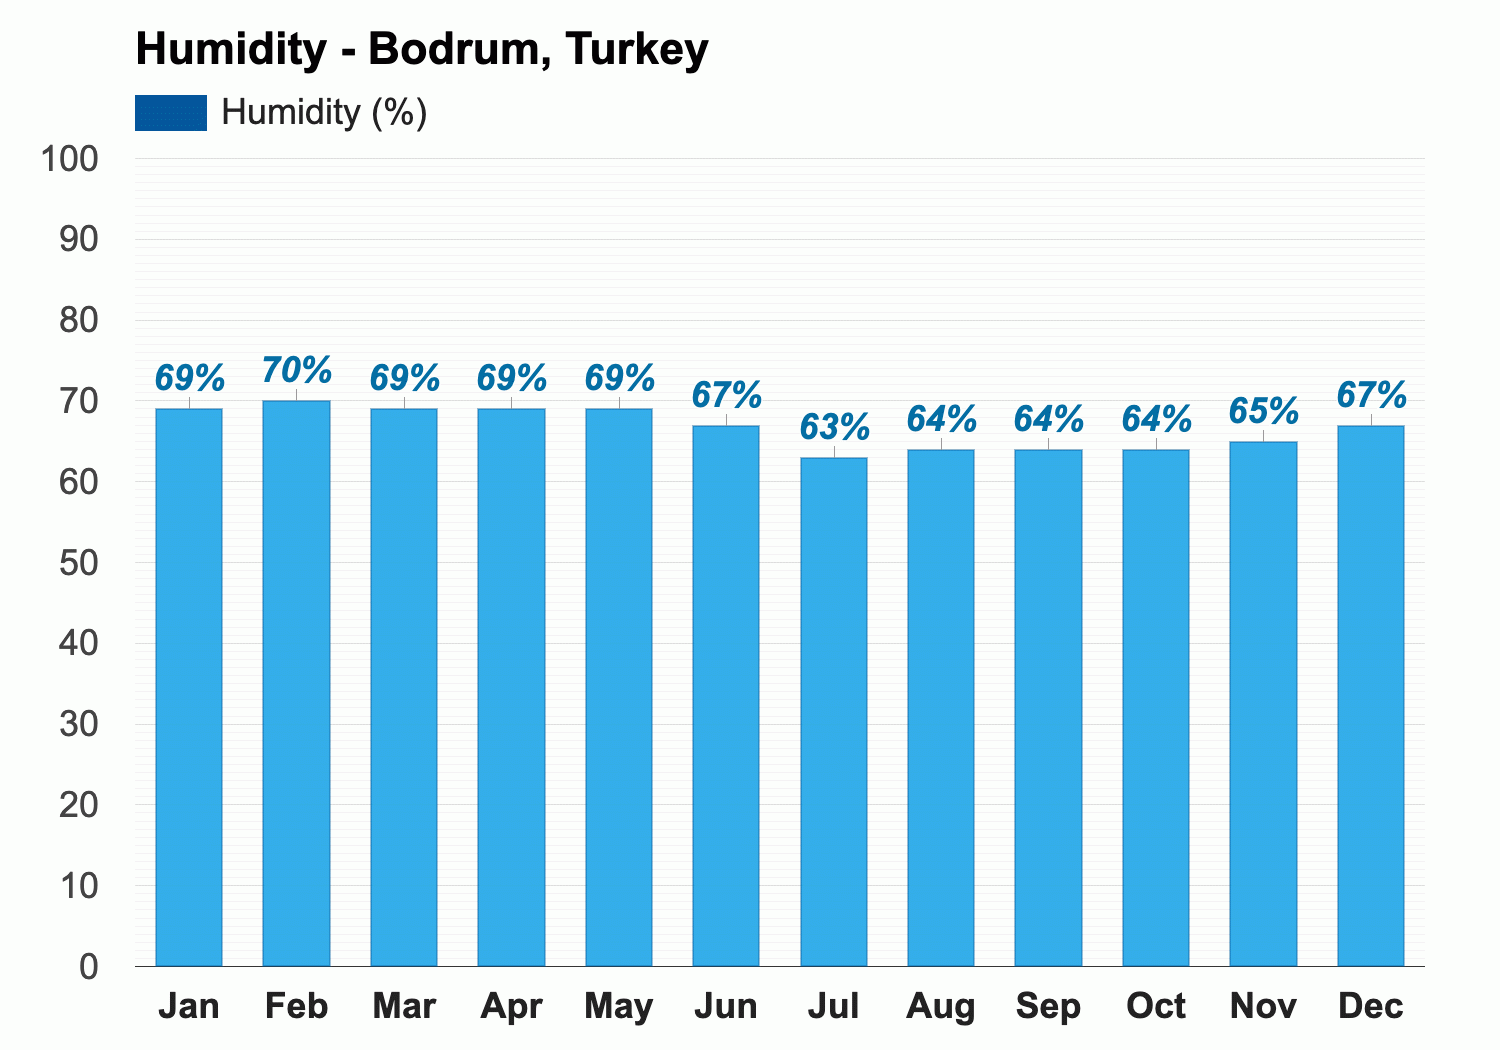 Bodrum, Turkey - Climate & Monthly weather forecast